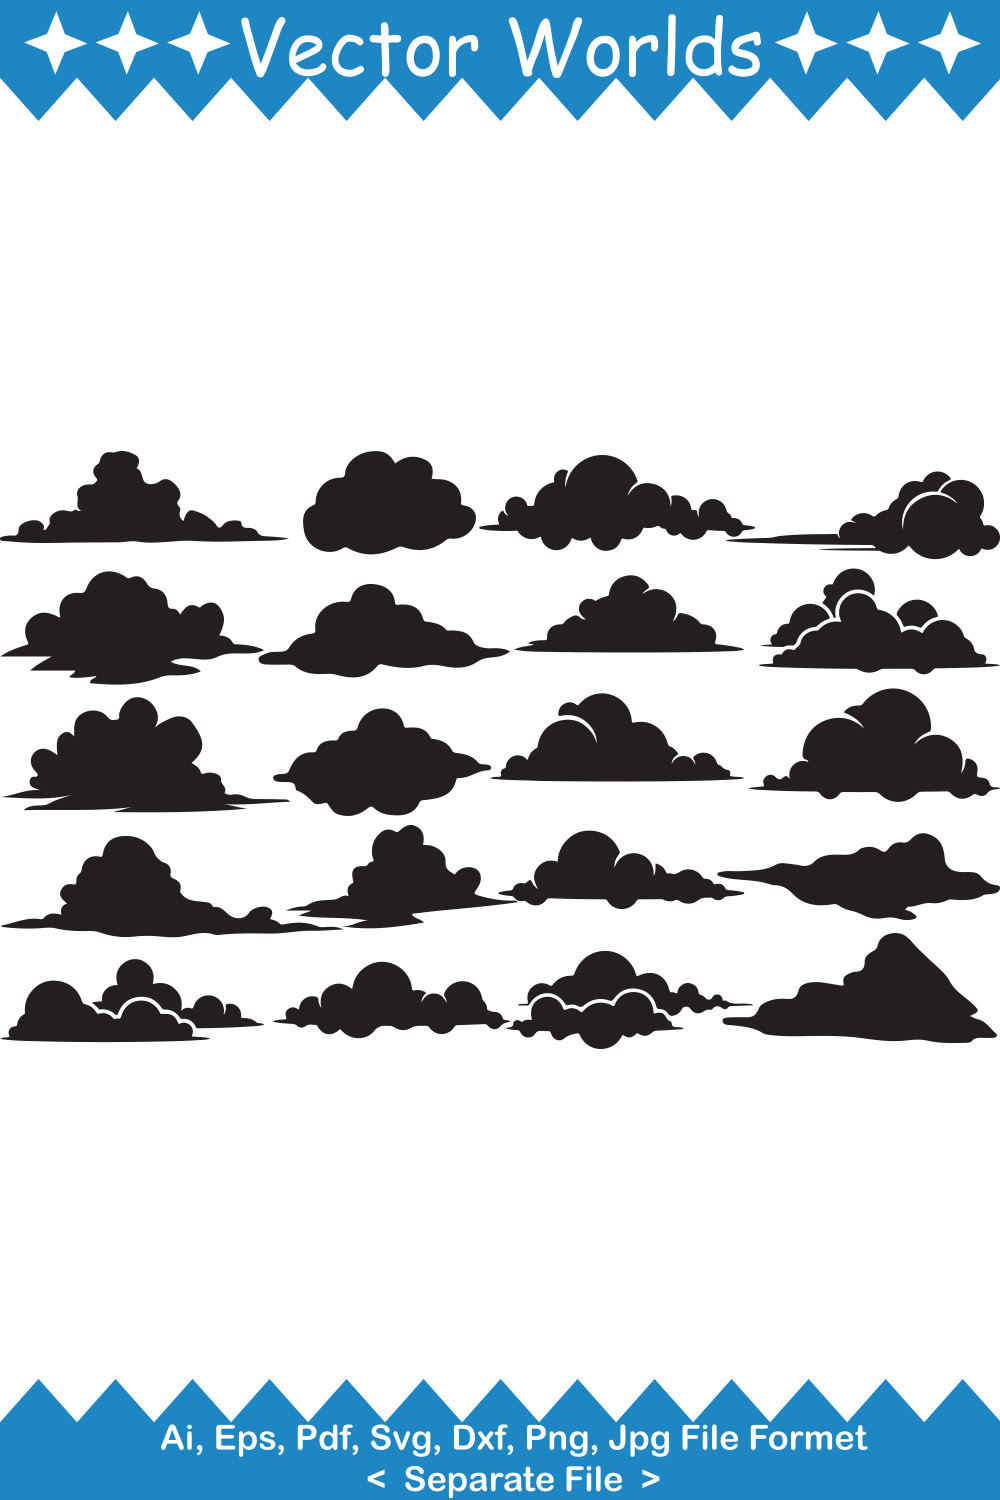 Set of beautiful vector images of silhouettes of clouds